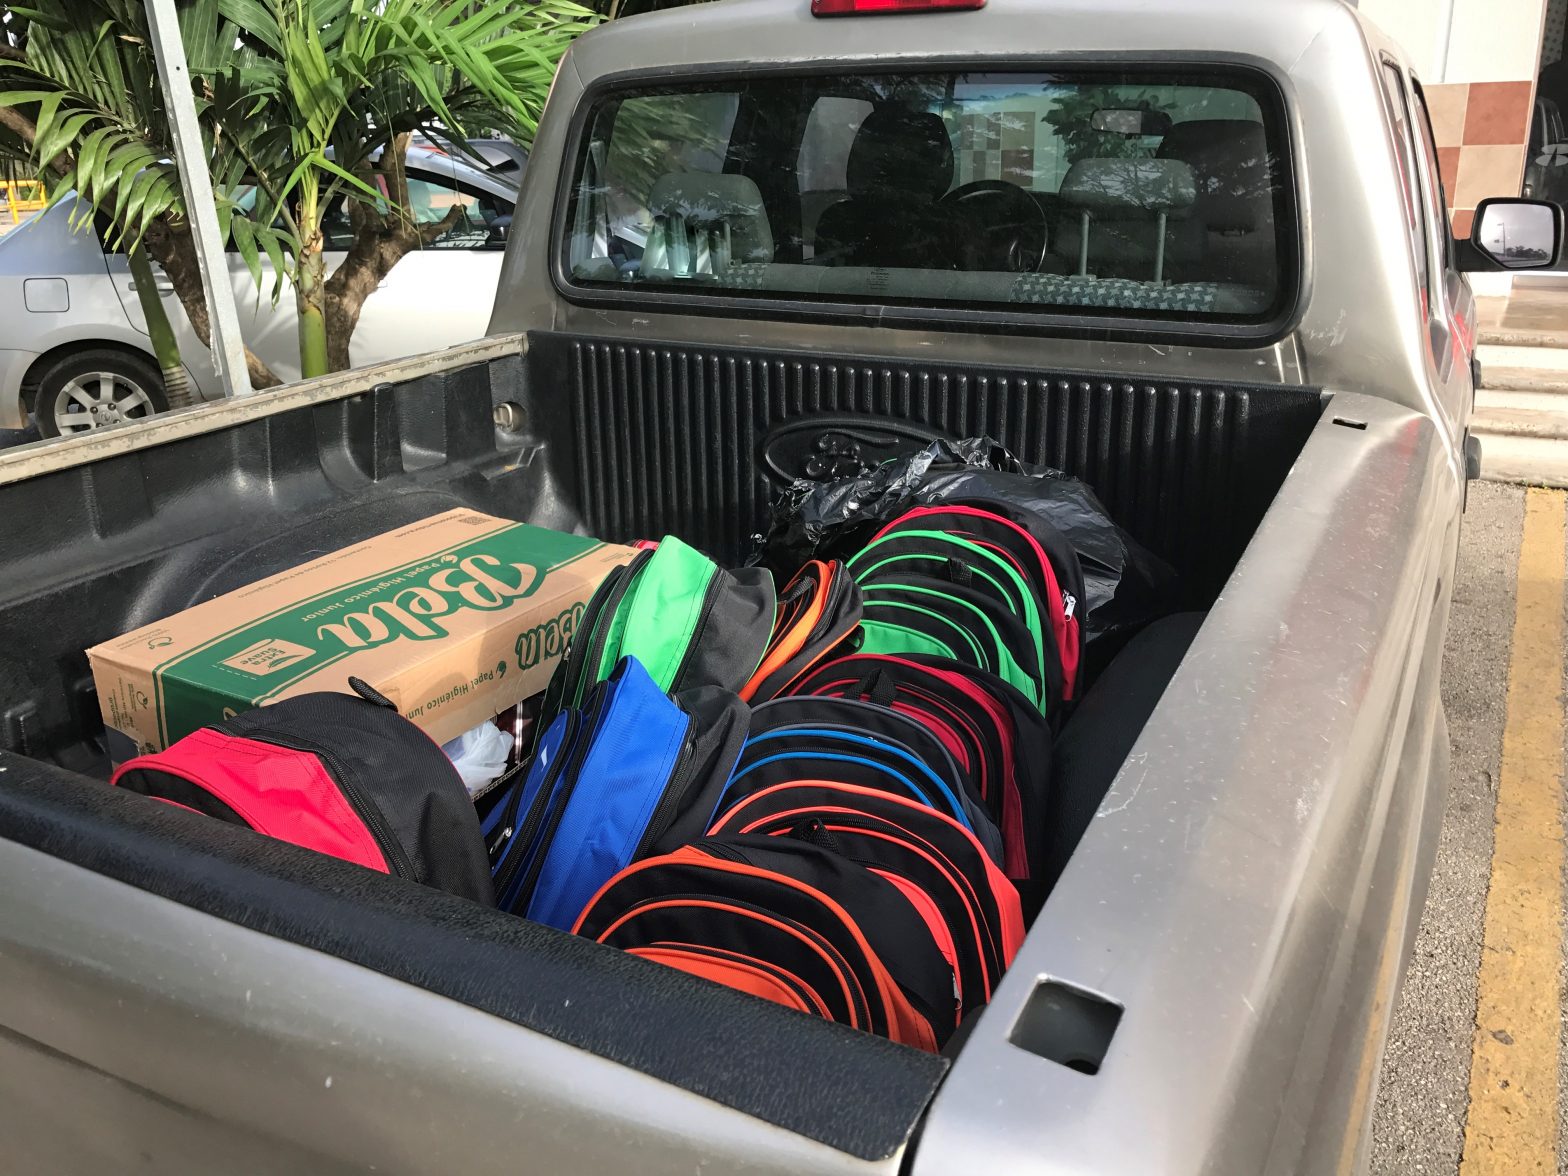 A dozen backpack in variety of bright colors sit in the bed of tan pick up truck along side a large cardboard box.